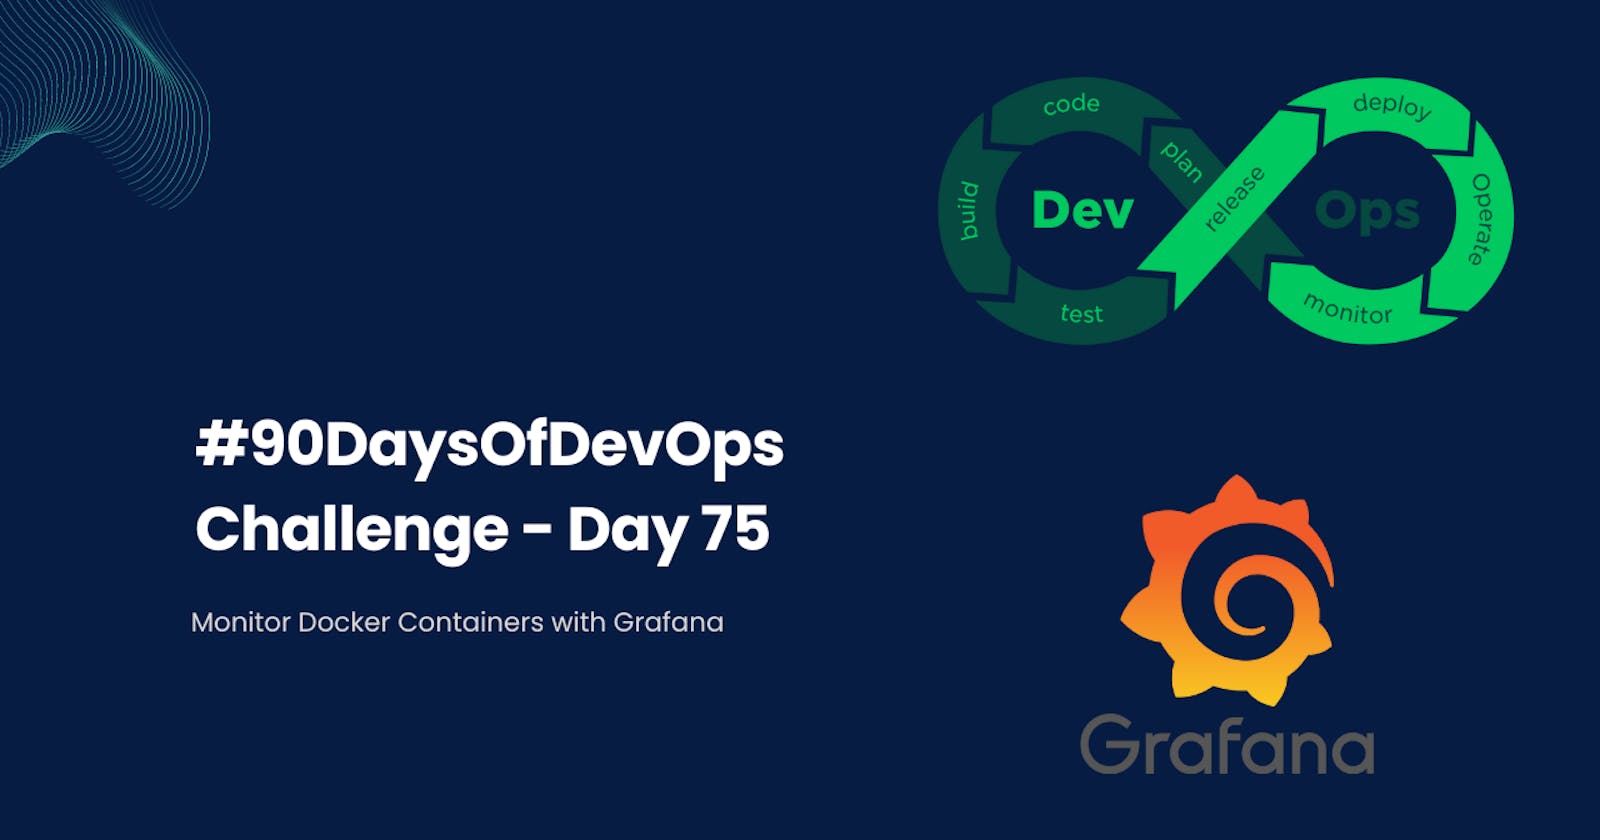 #90DaysOfDevOps Challenge - Day 75 - Monitor Docker Containers with Grafana